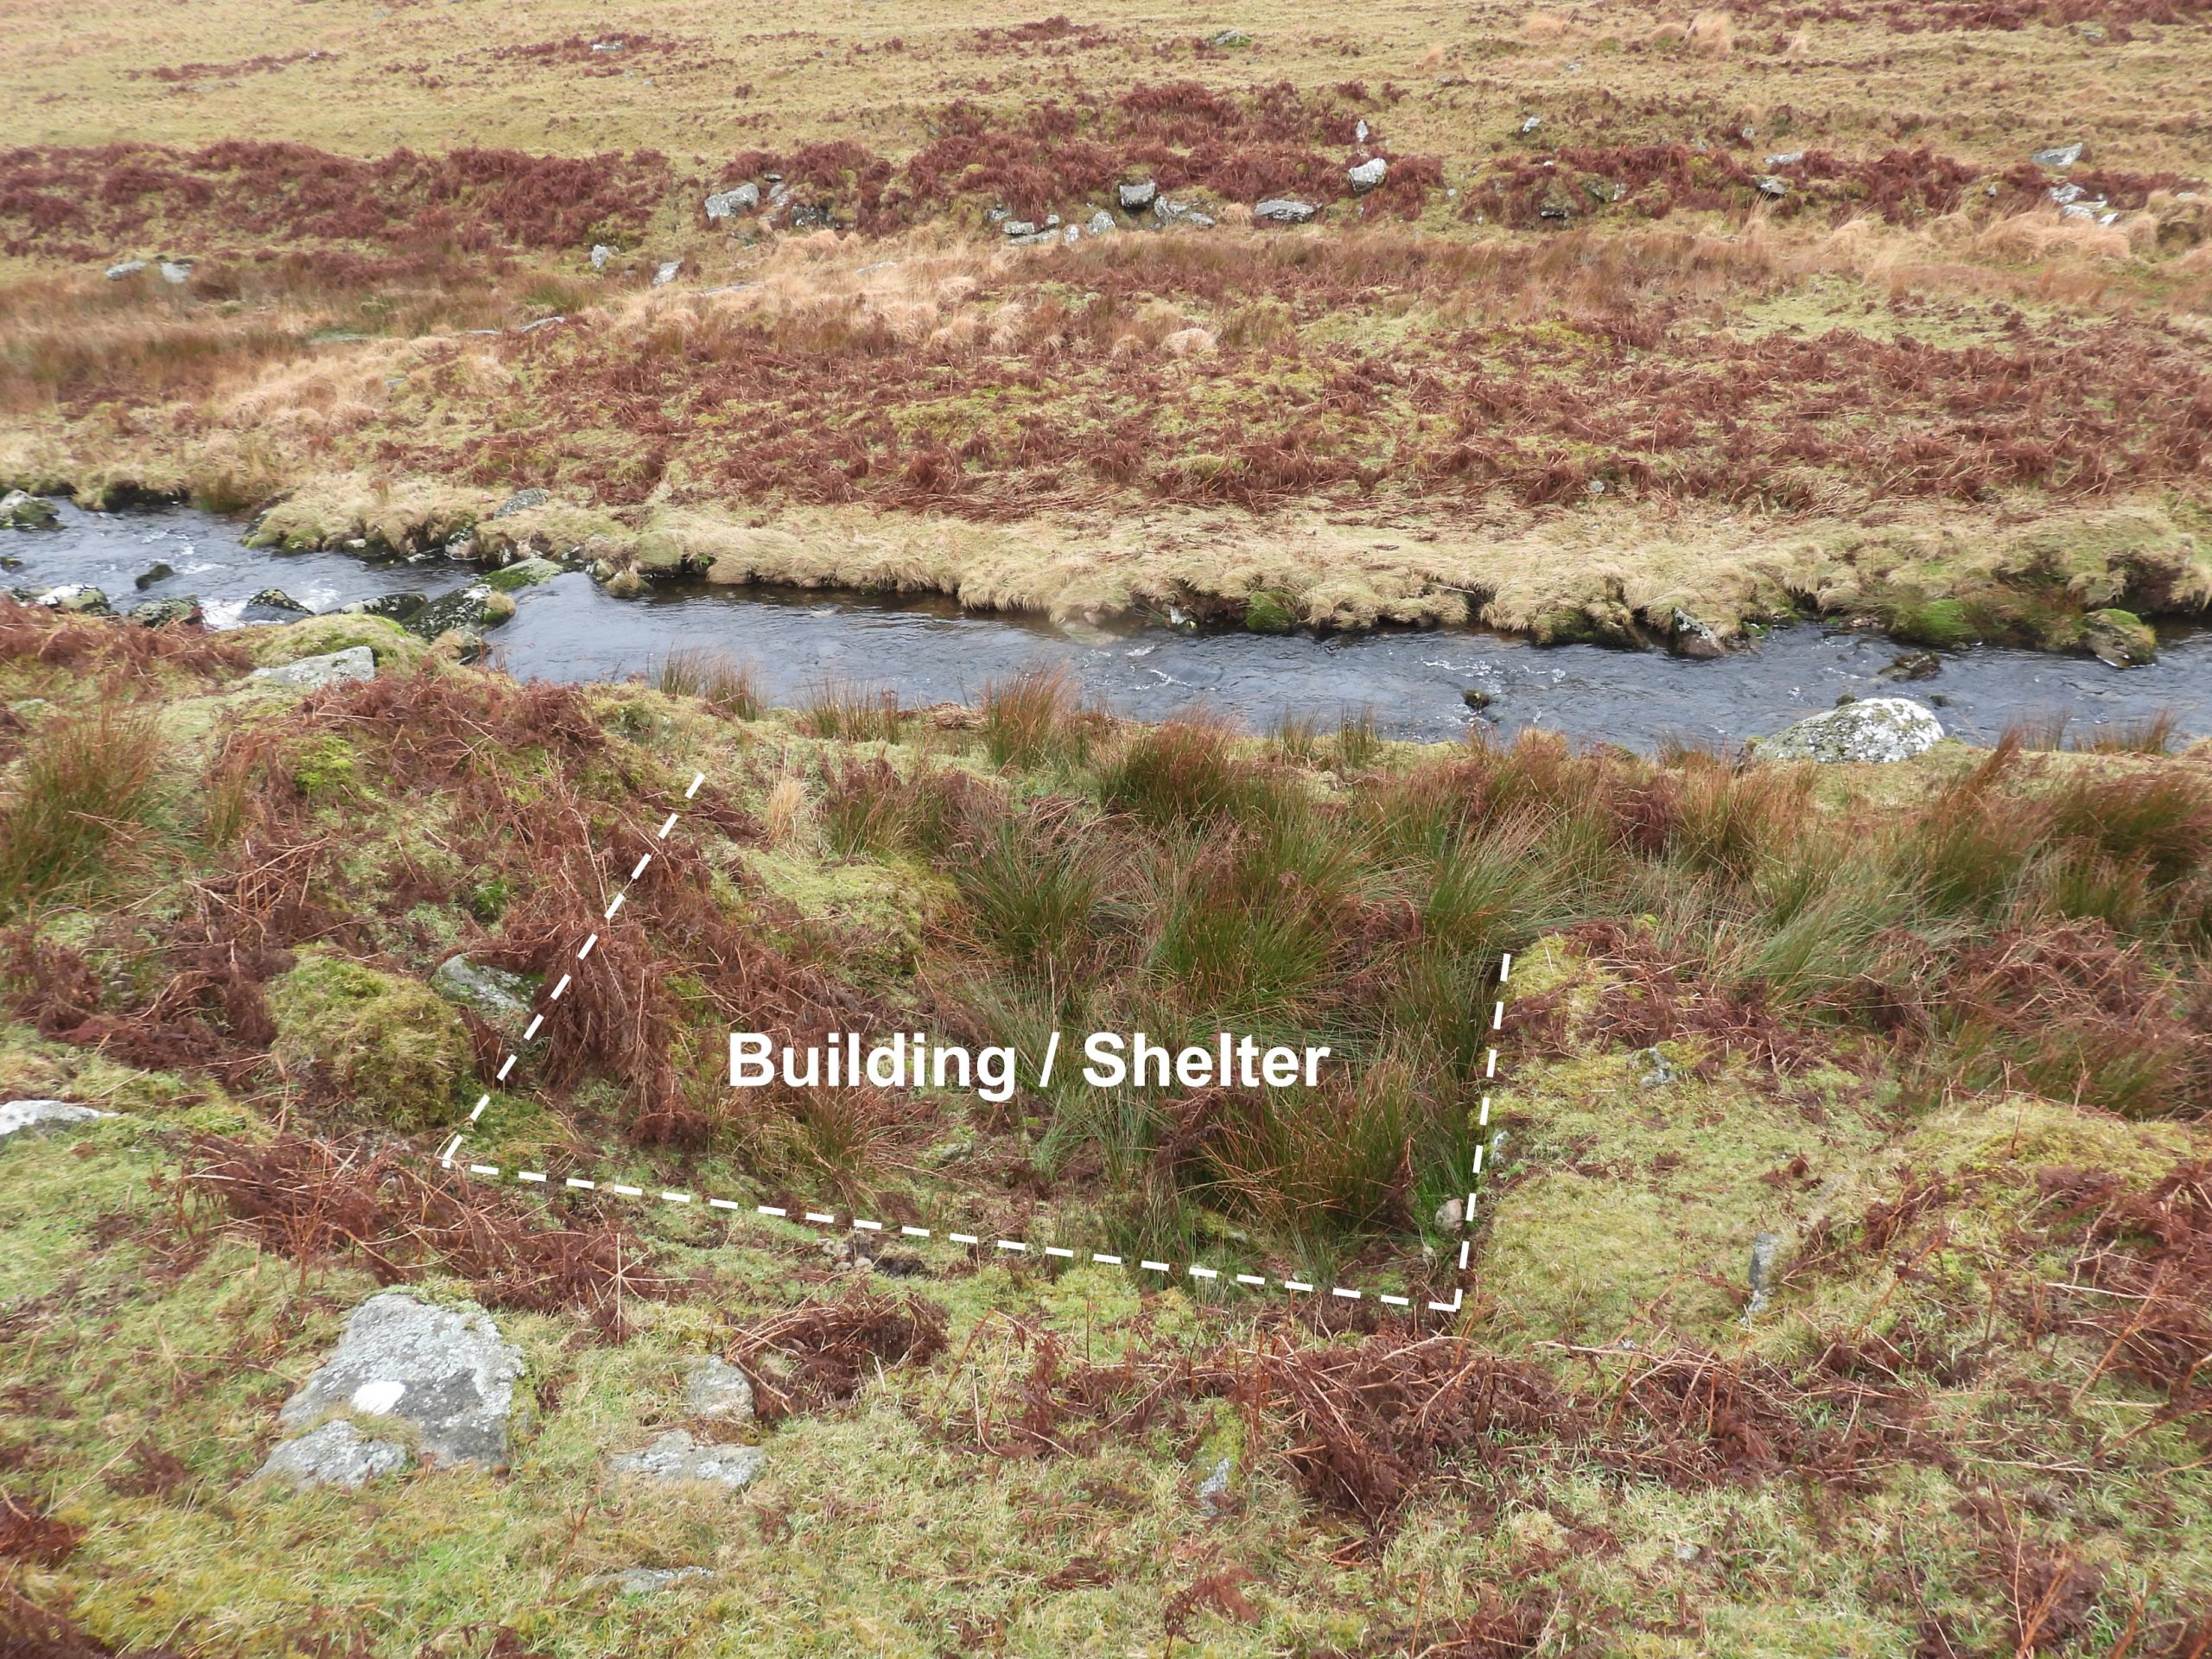 10a. Building - Shelter